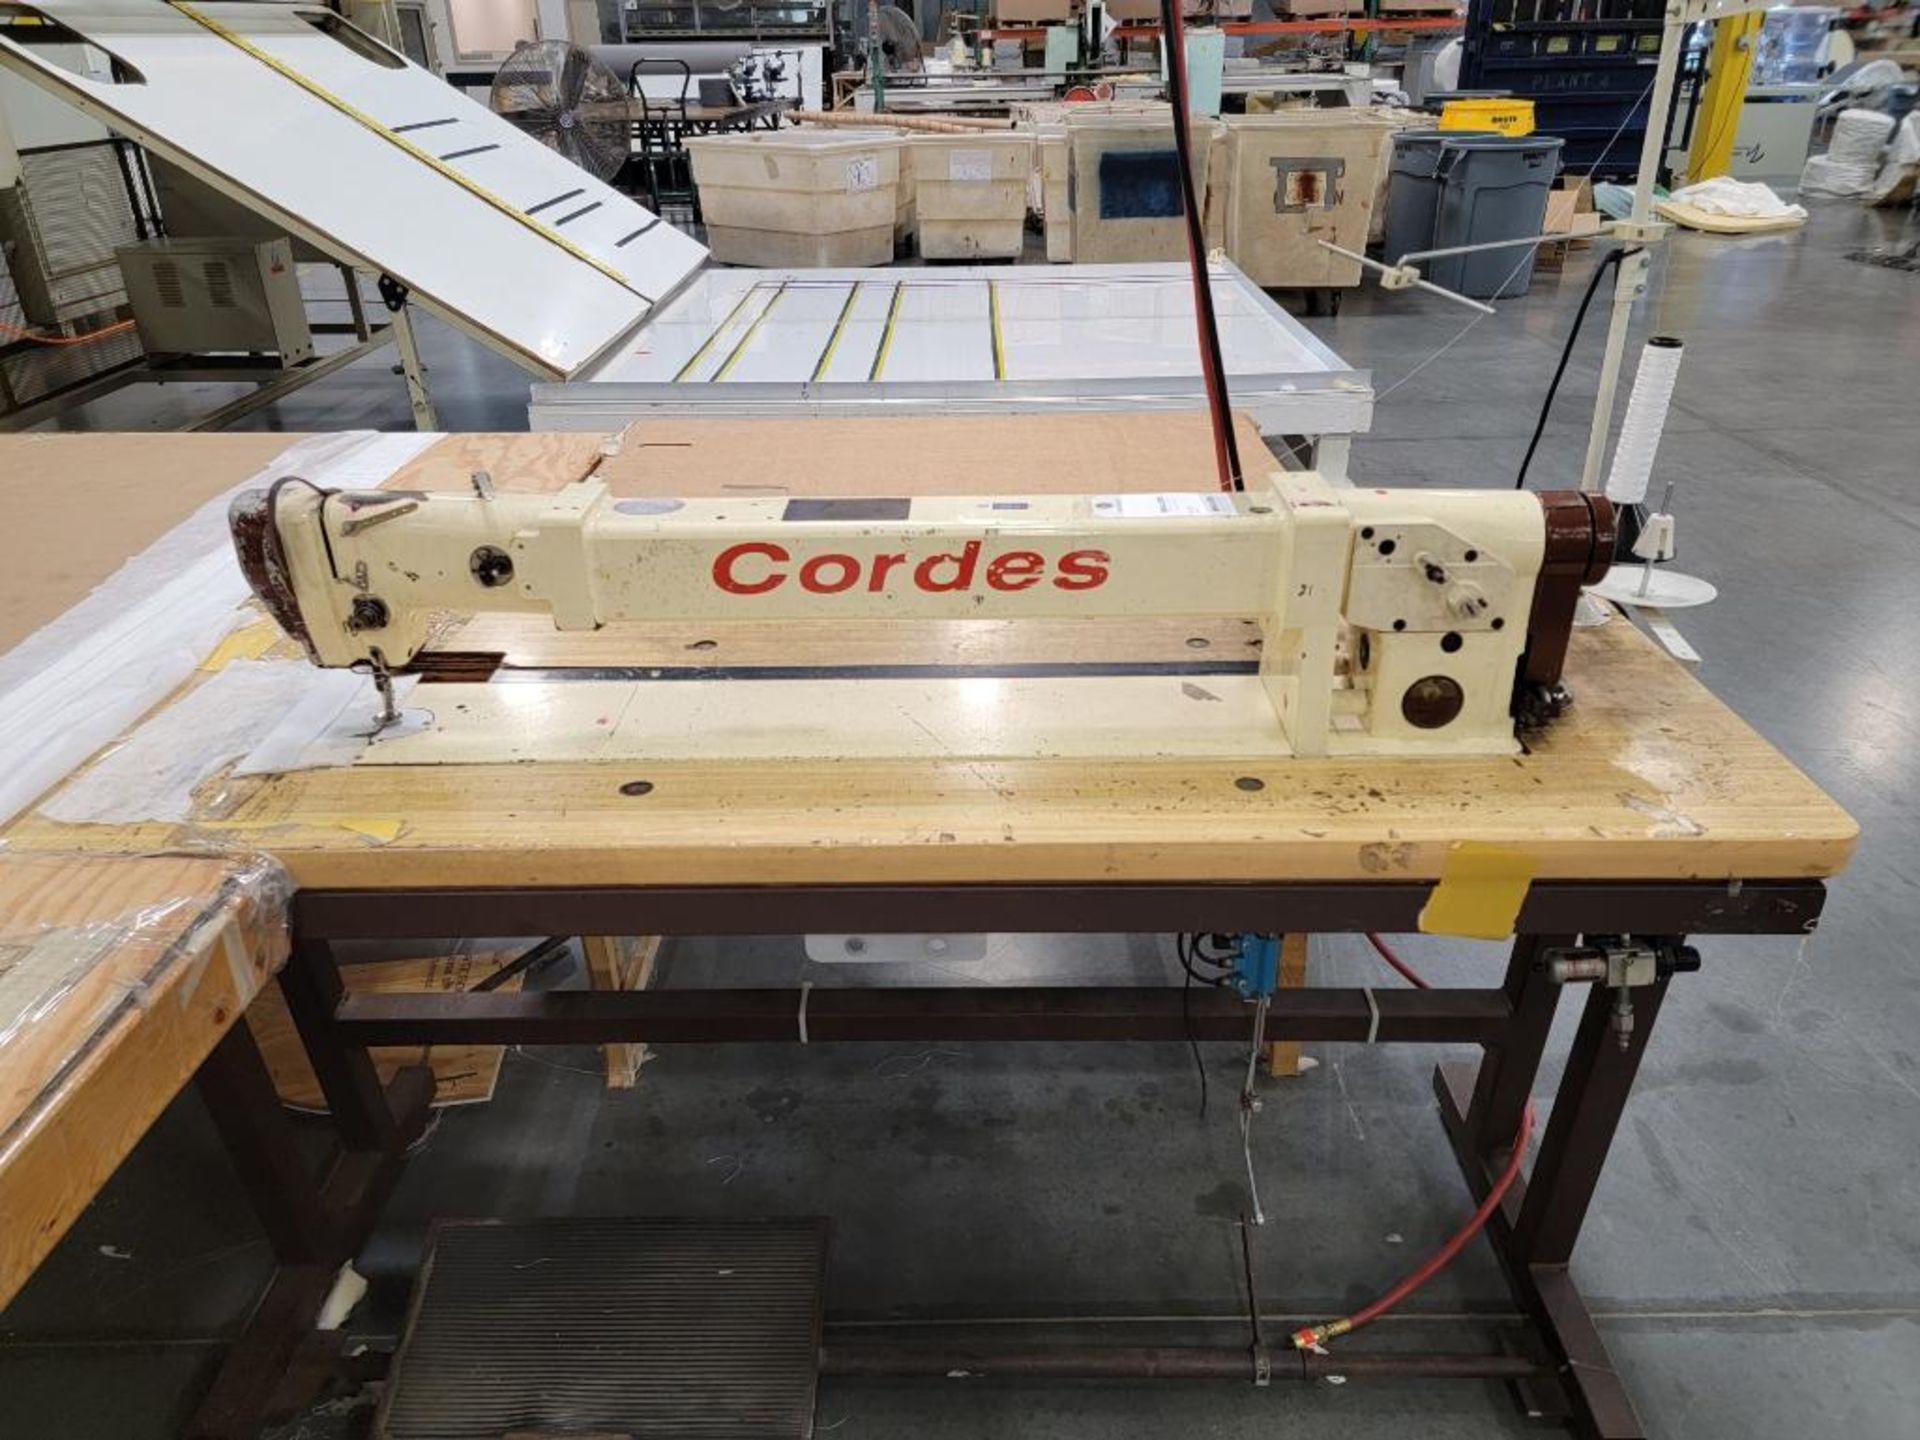 Cordes Long Arm Sewing Machine [25073], 36" Throat, complete with Table, Foot Petal, and Servo Motor